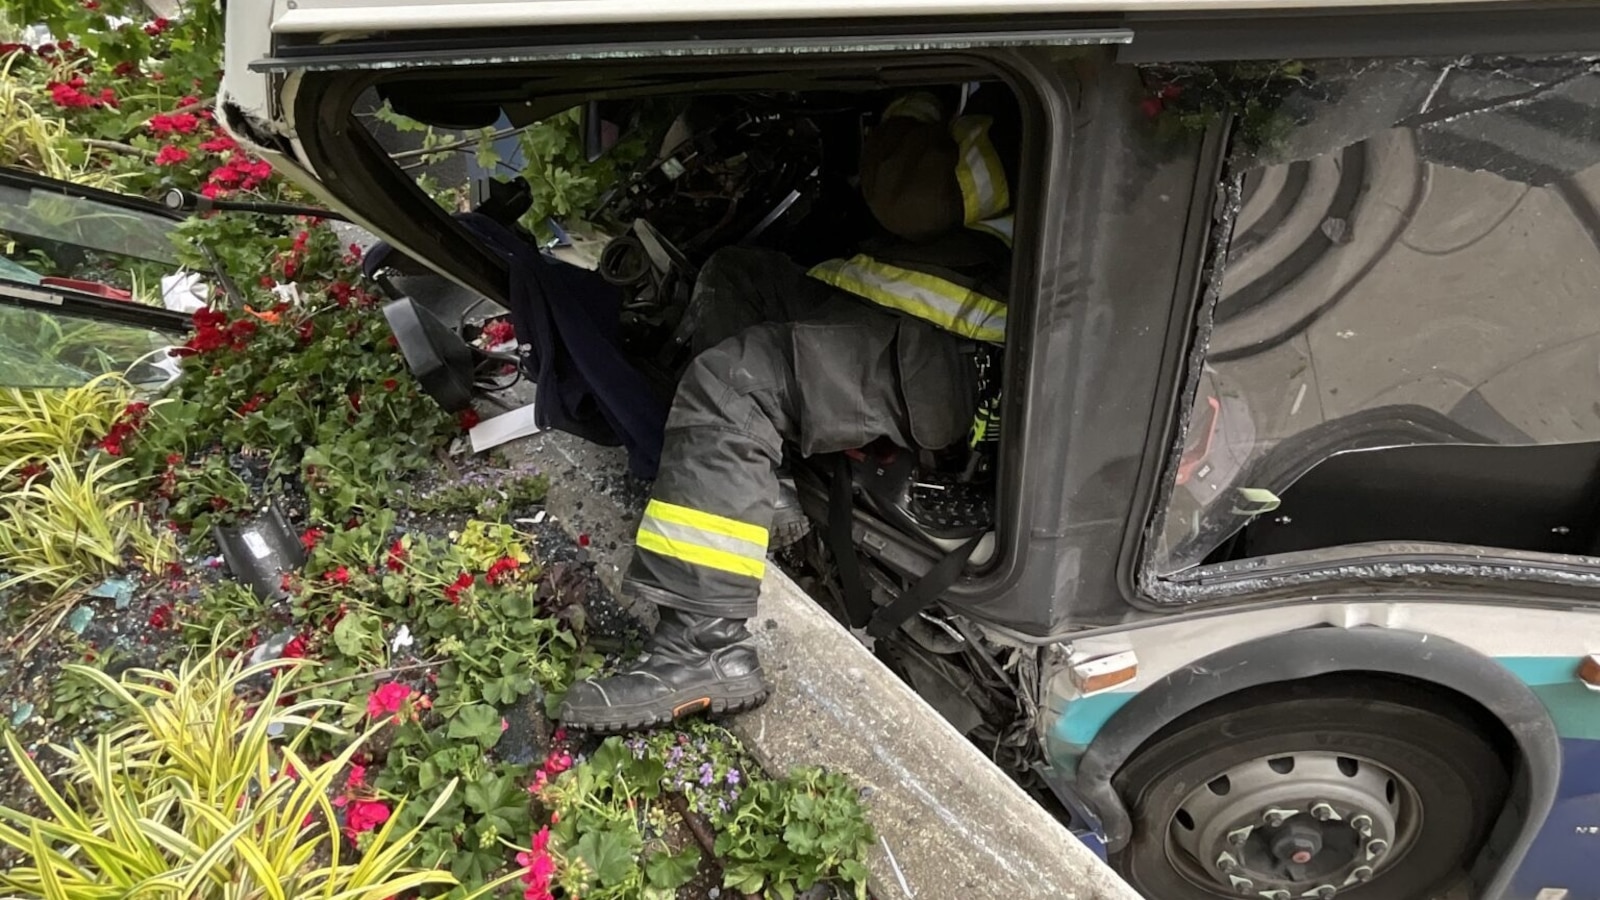 At least 11 injured as bus crashes into Seattle building, fire department says [Video]